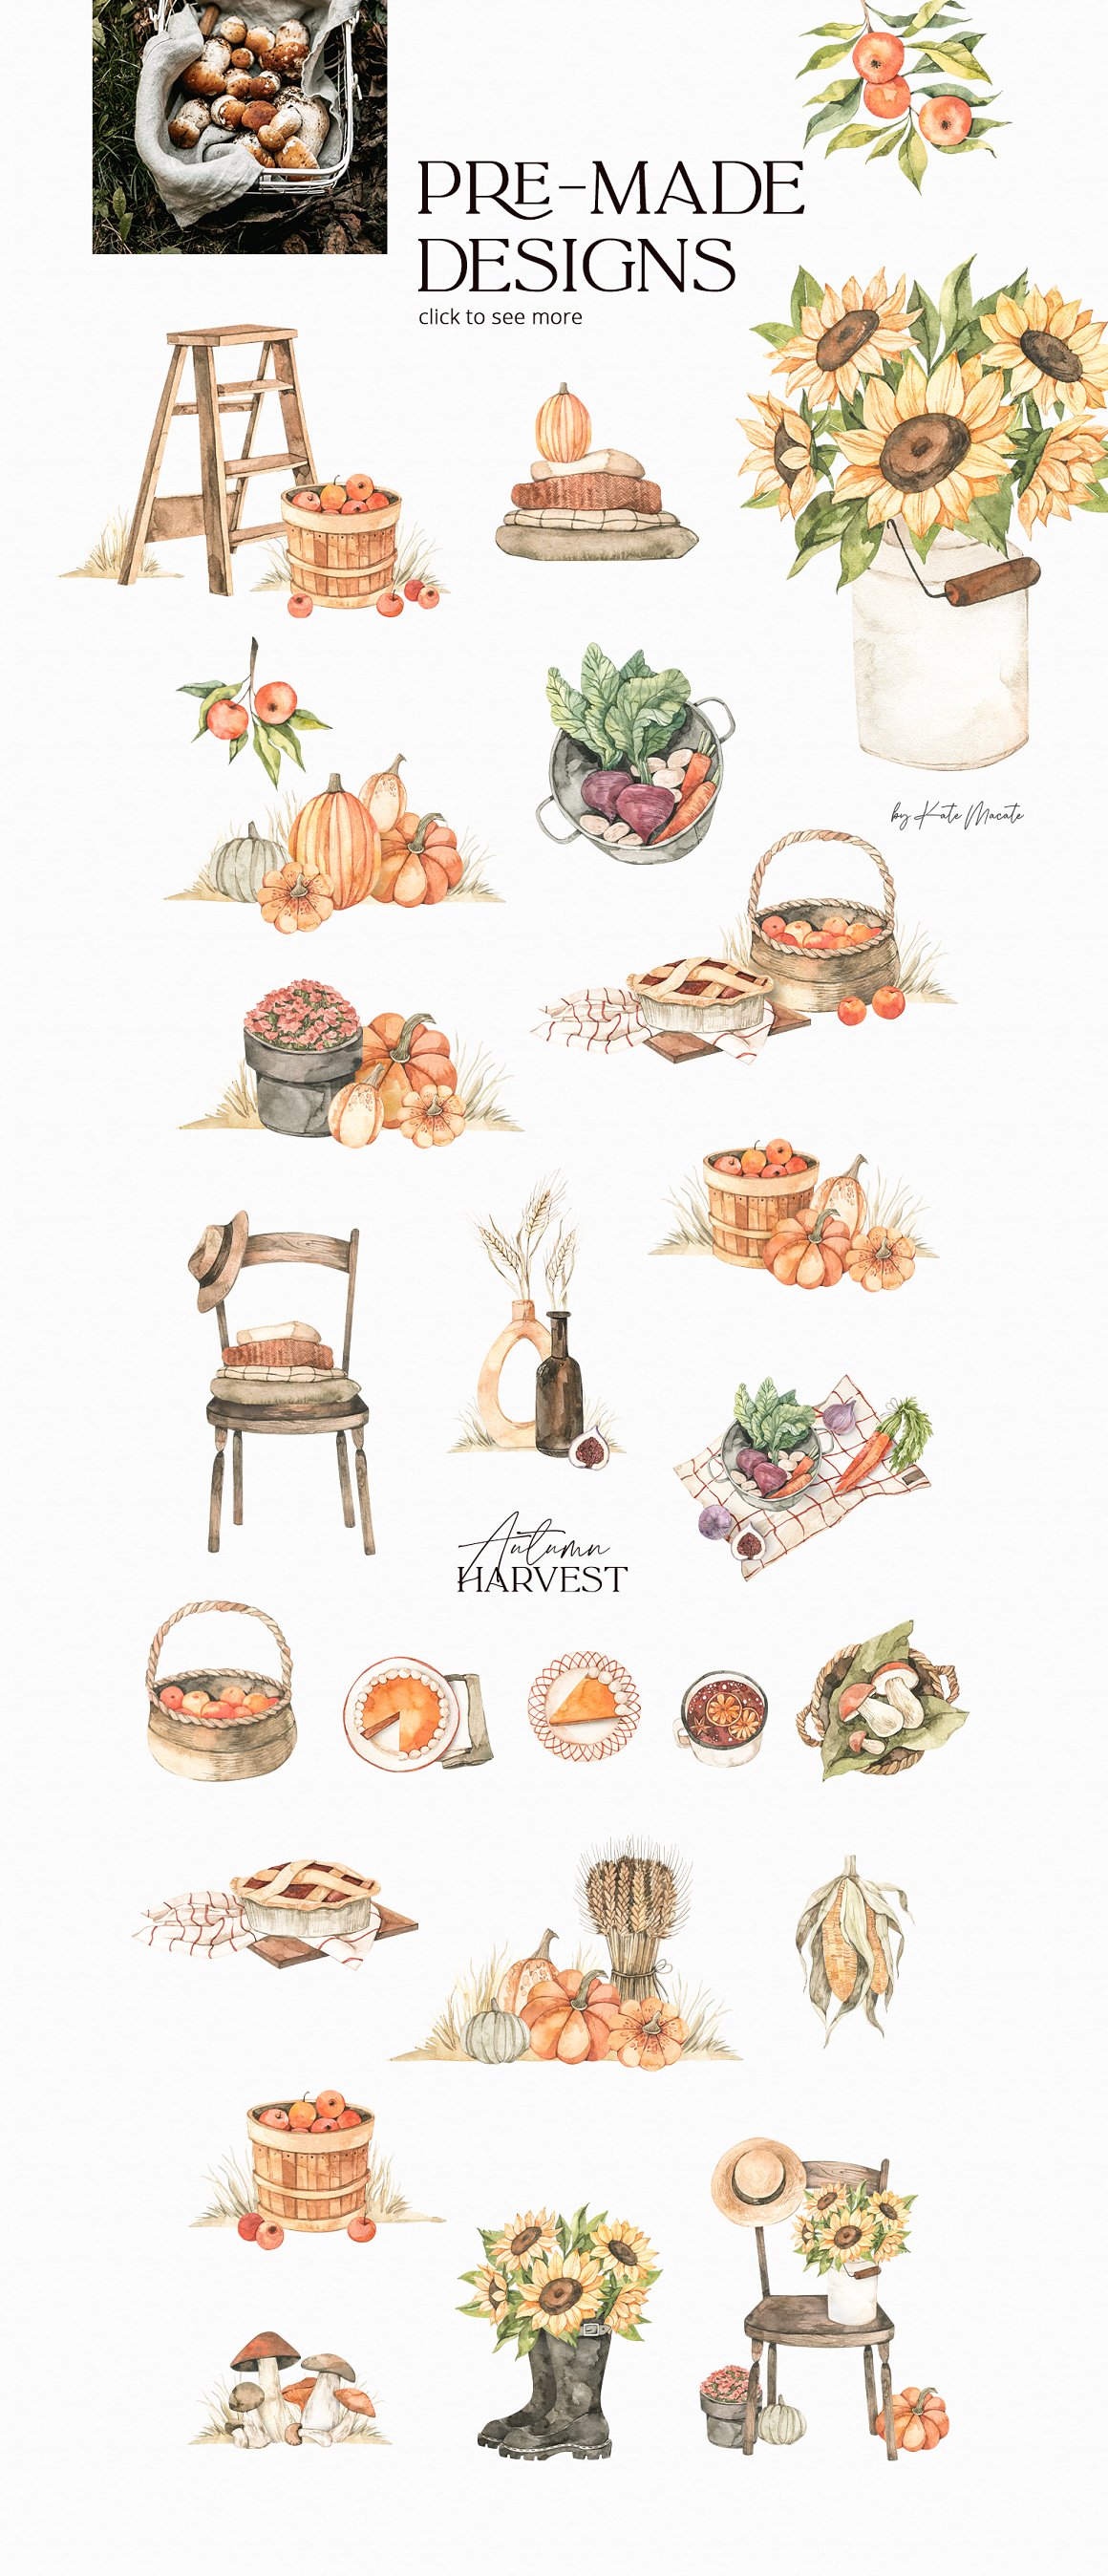 A chair, vegetables, baskets and more.